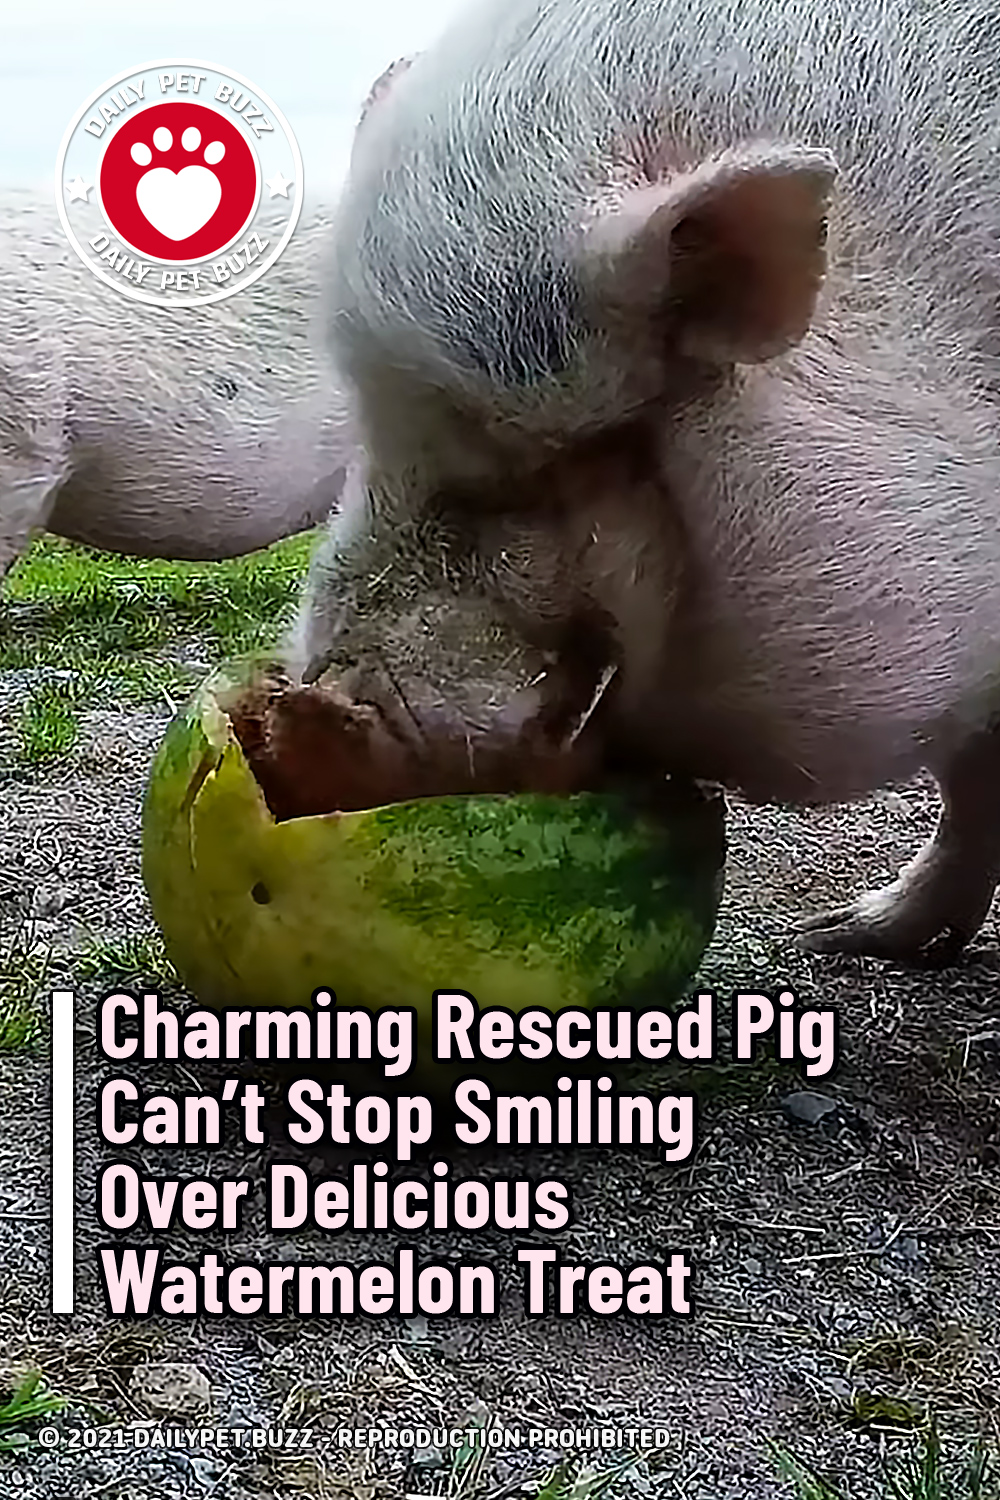 Charming Rescued Pig Can’t Stop Smiling Over Delicious Watermelon Treat